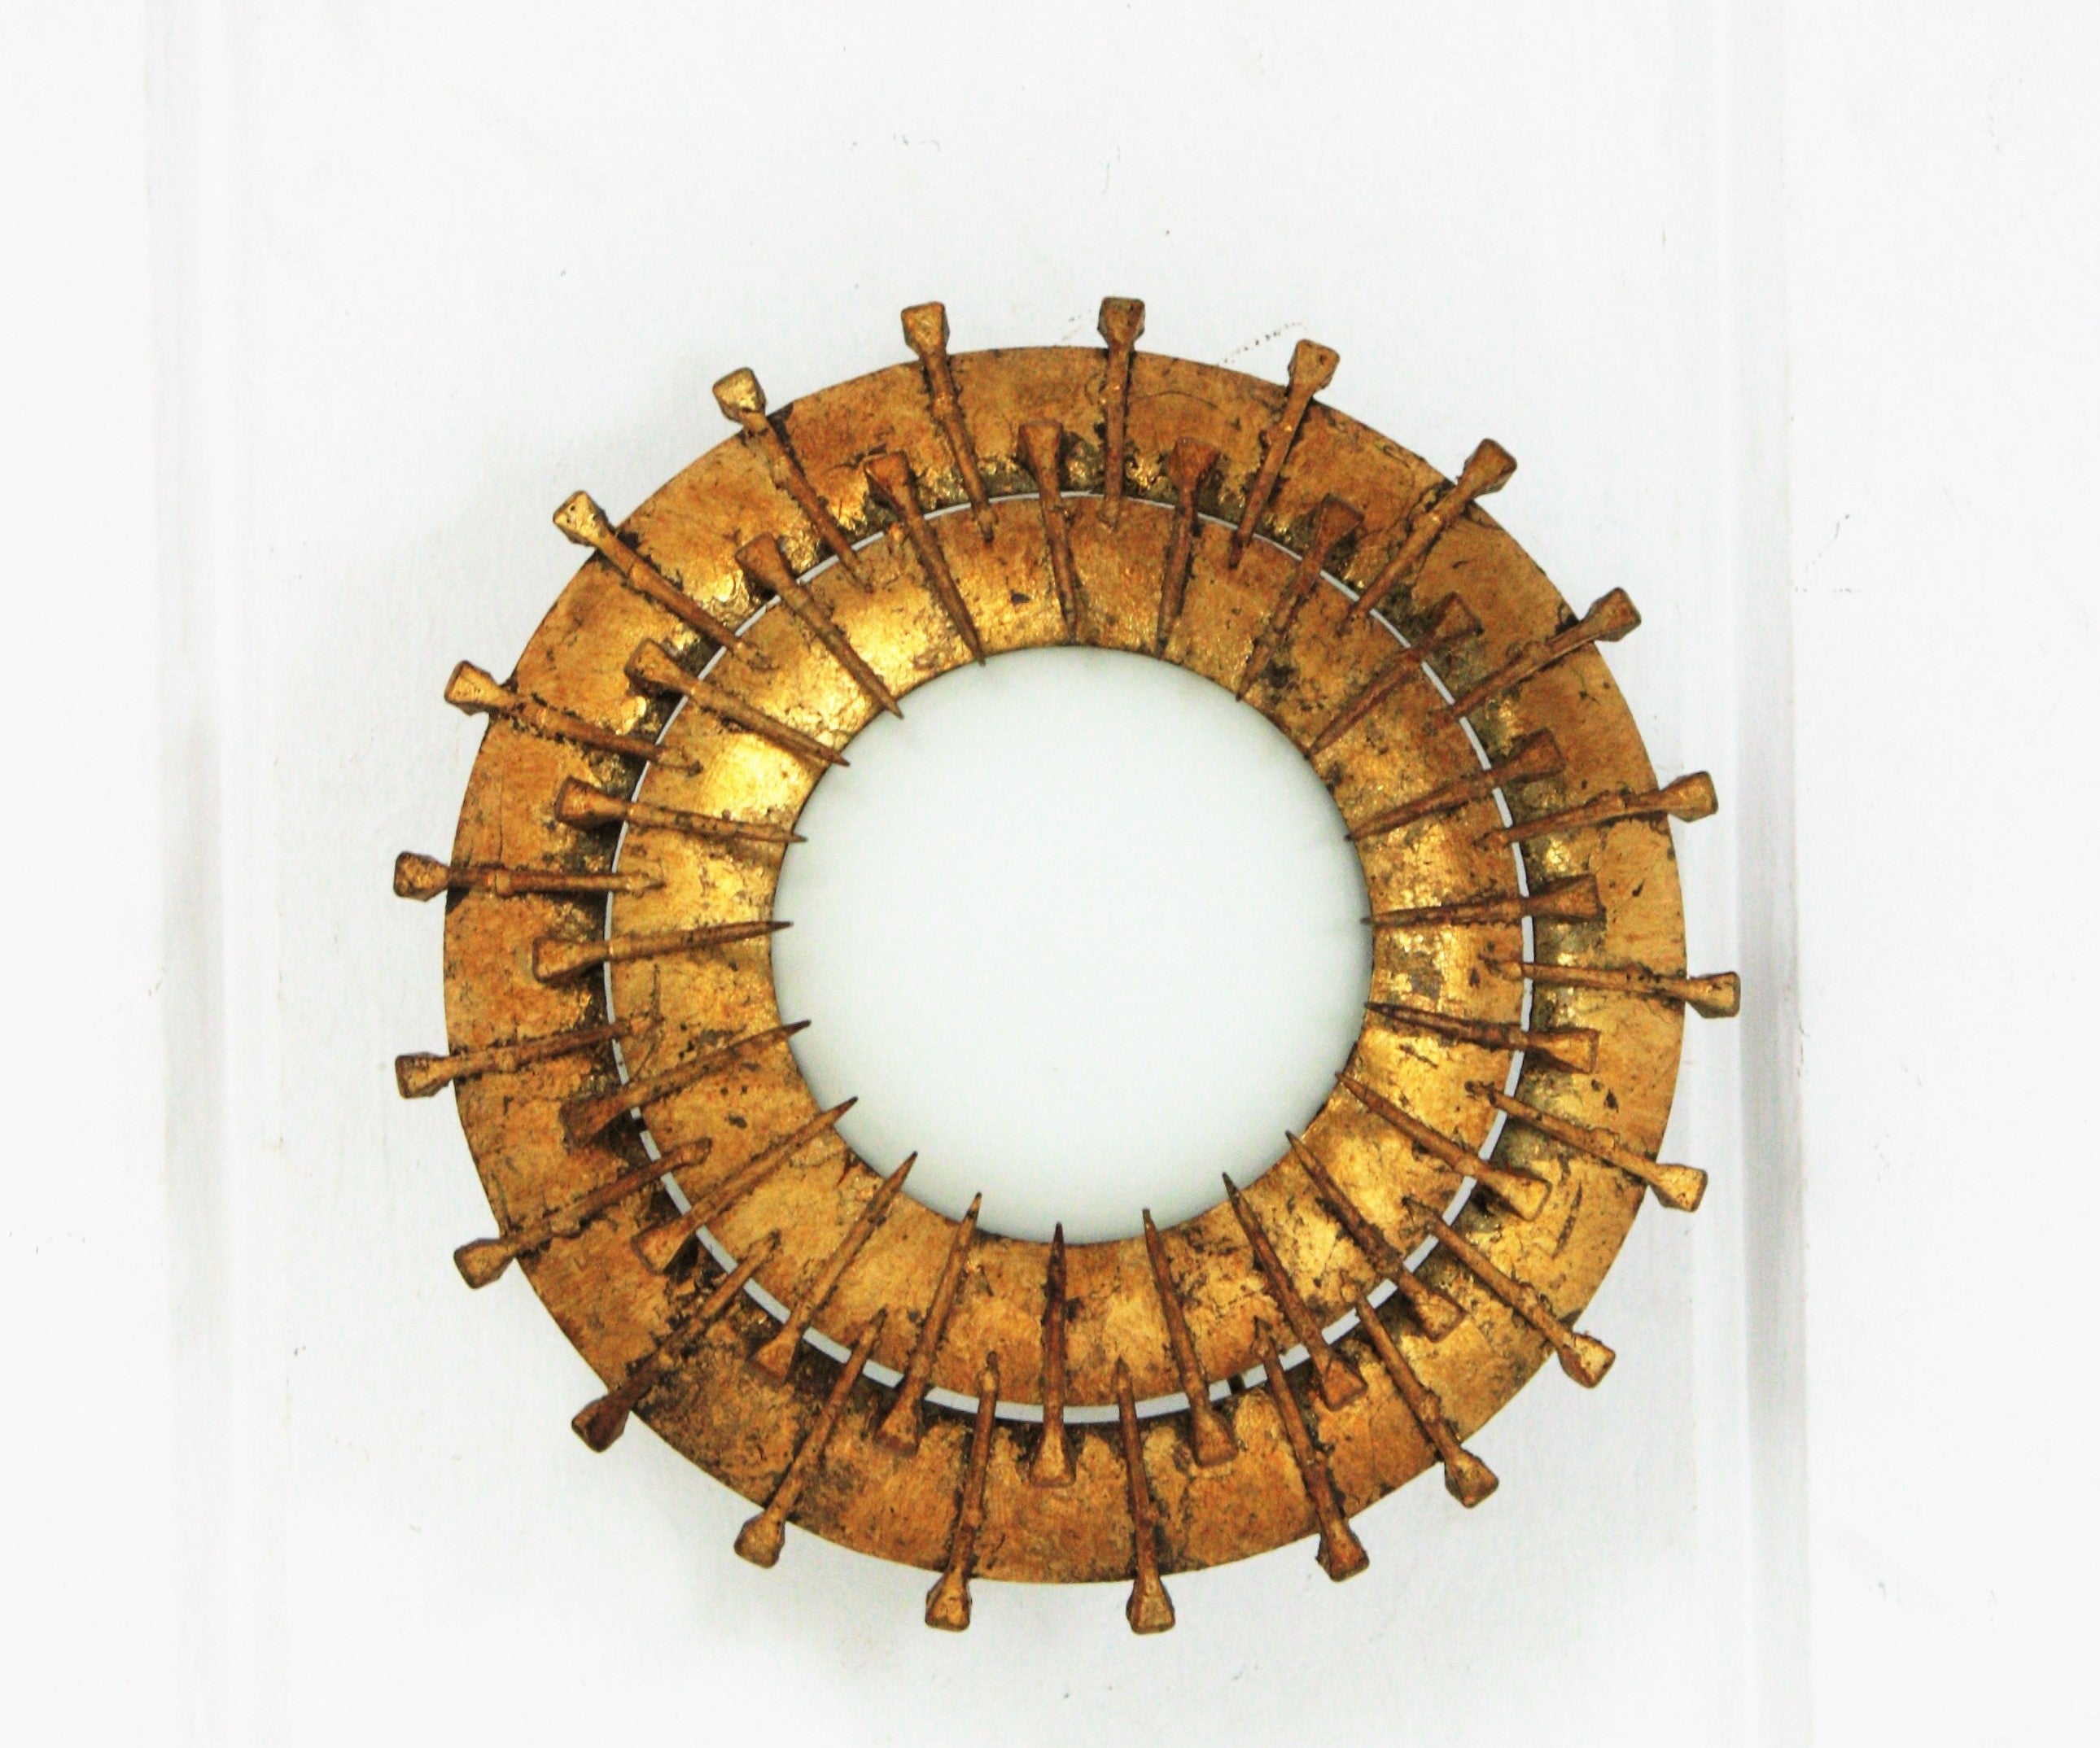 Double Layered Nail Design sunburst light fixture, milk glass, gilt iron, France, 1940s-1950s. 
This sunburst light fixture features a gilt iron ring with two layers of iron nails surrounding a central milk glass difusser. Style in transition from